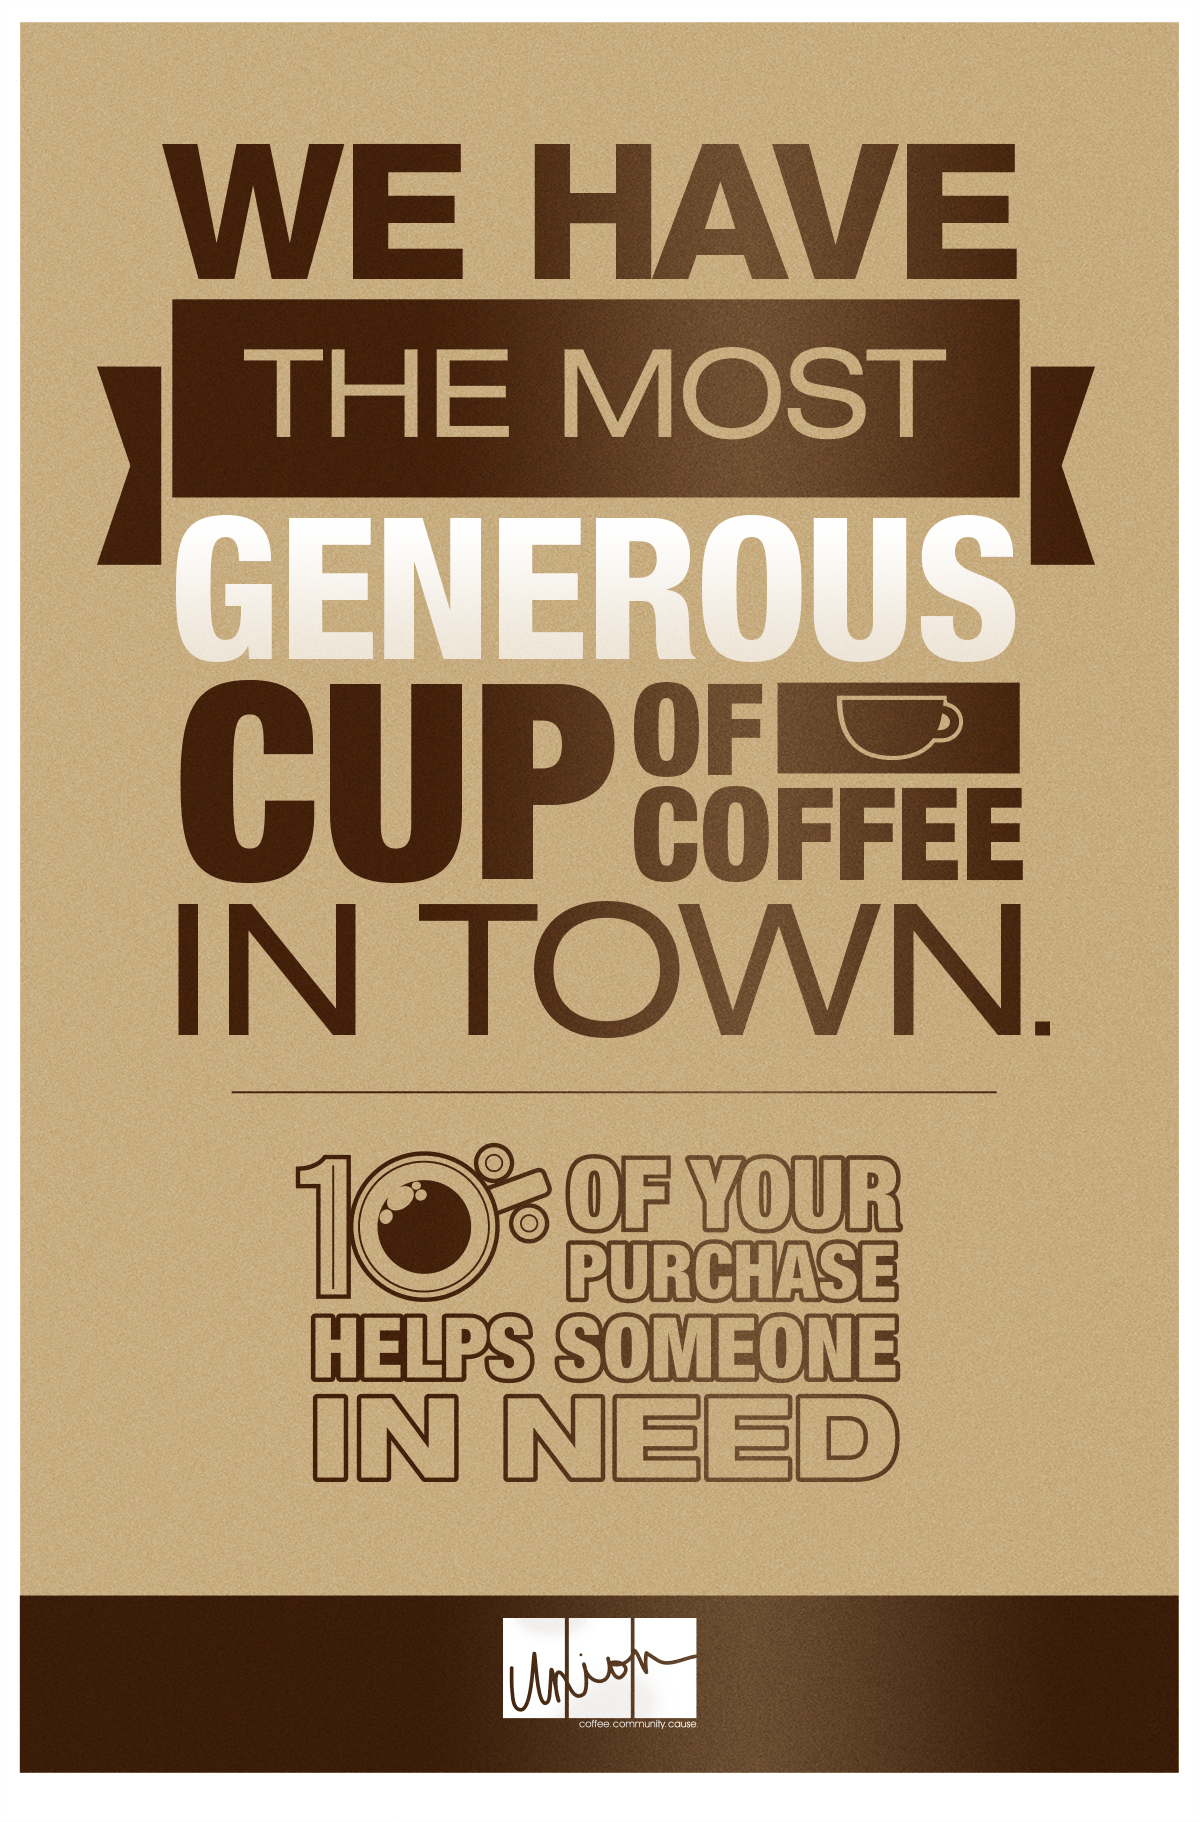 Union Coffee Poster for Child Literacy - Generous Cup by Tidal Wave Marketing